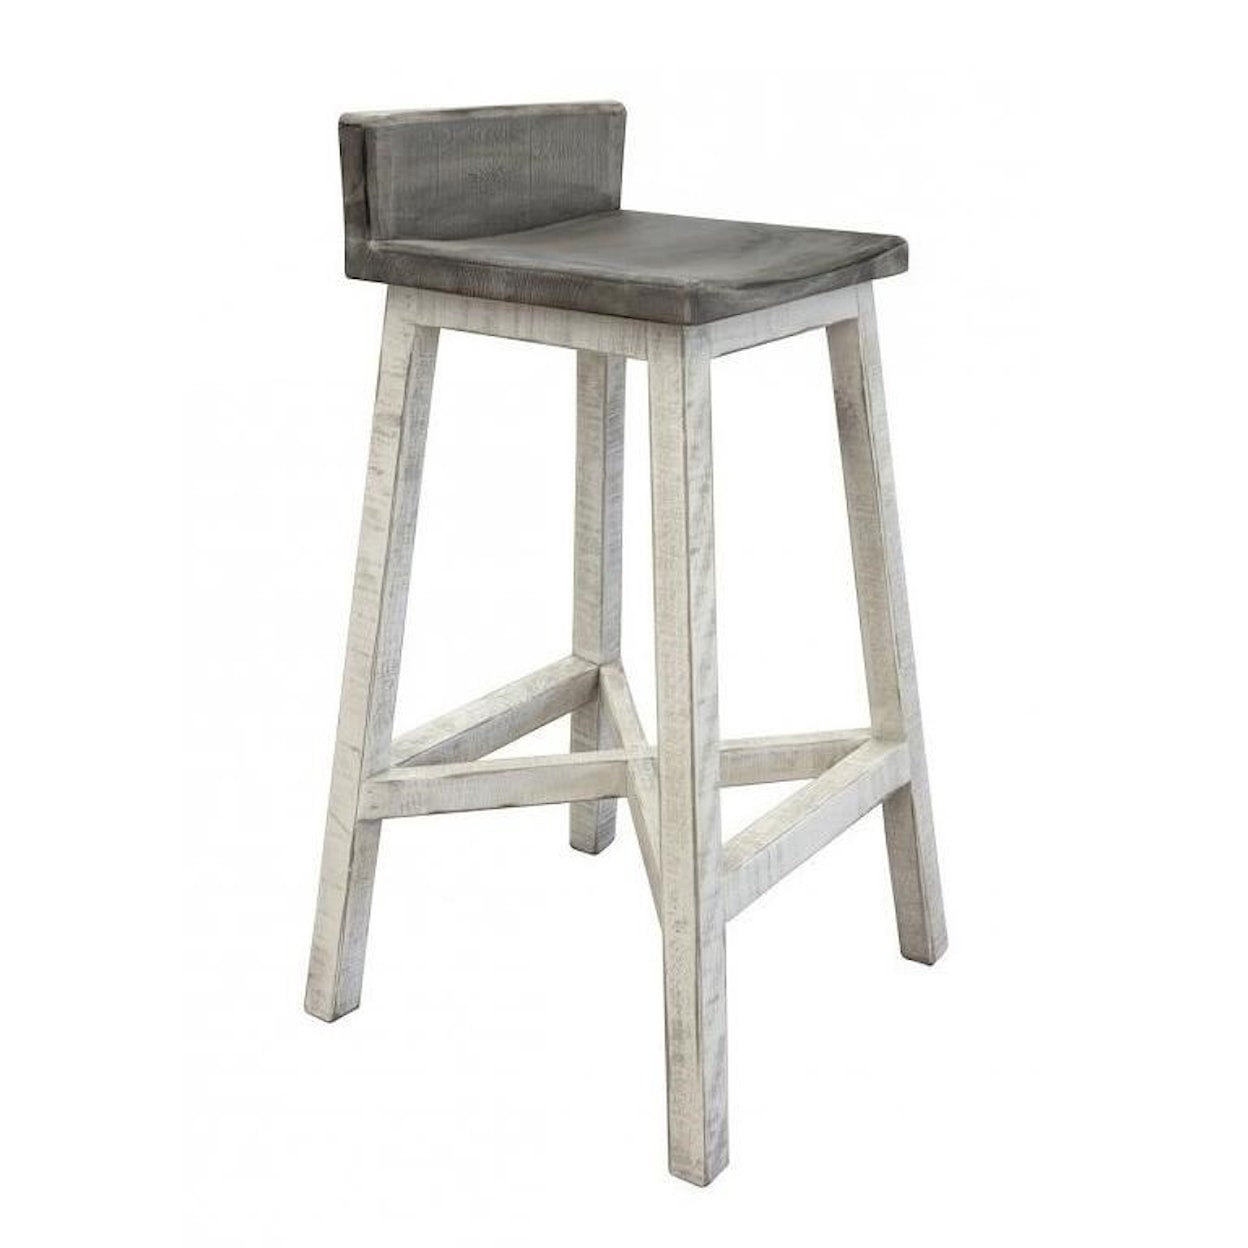 IFD International Furniture Direct Stone 30" Stool with Wooden Seat and Base